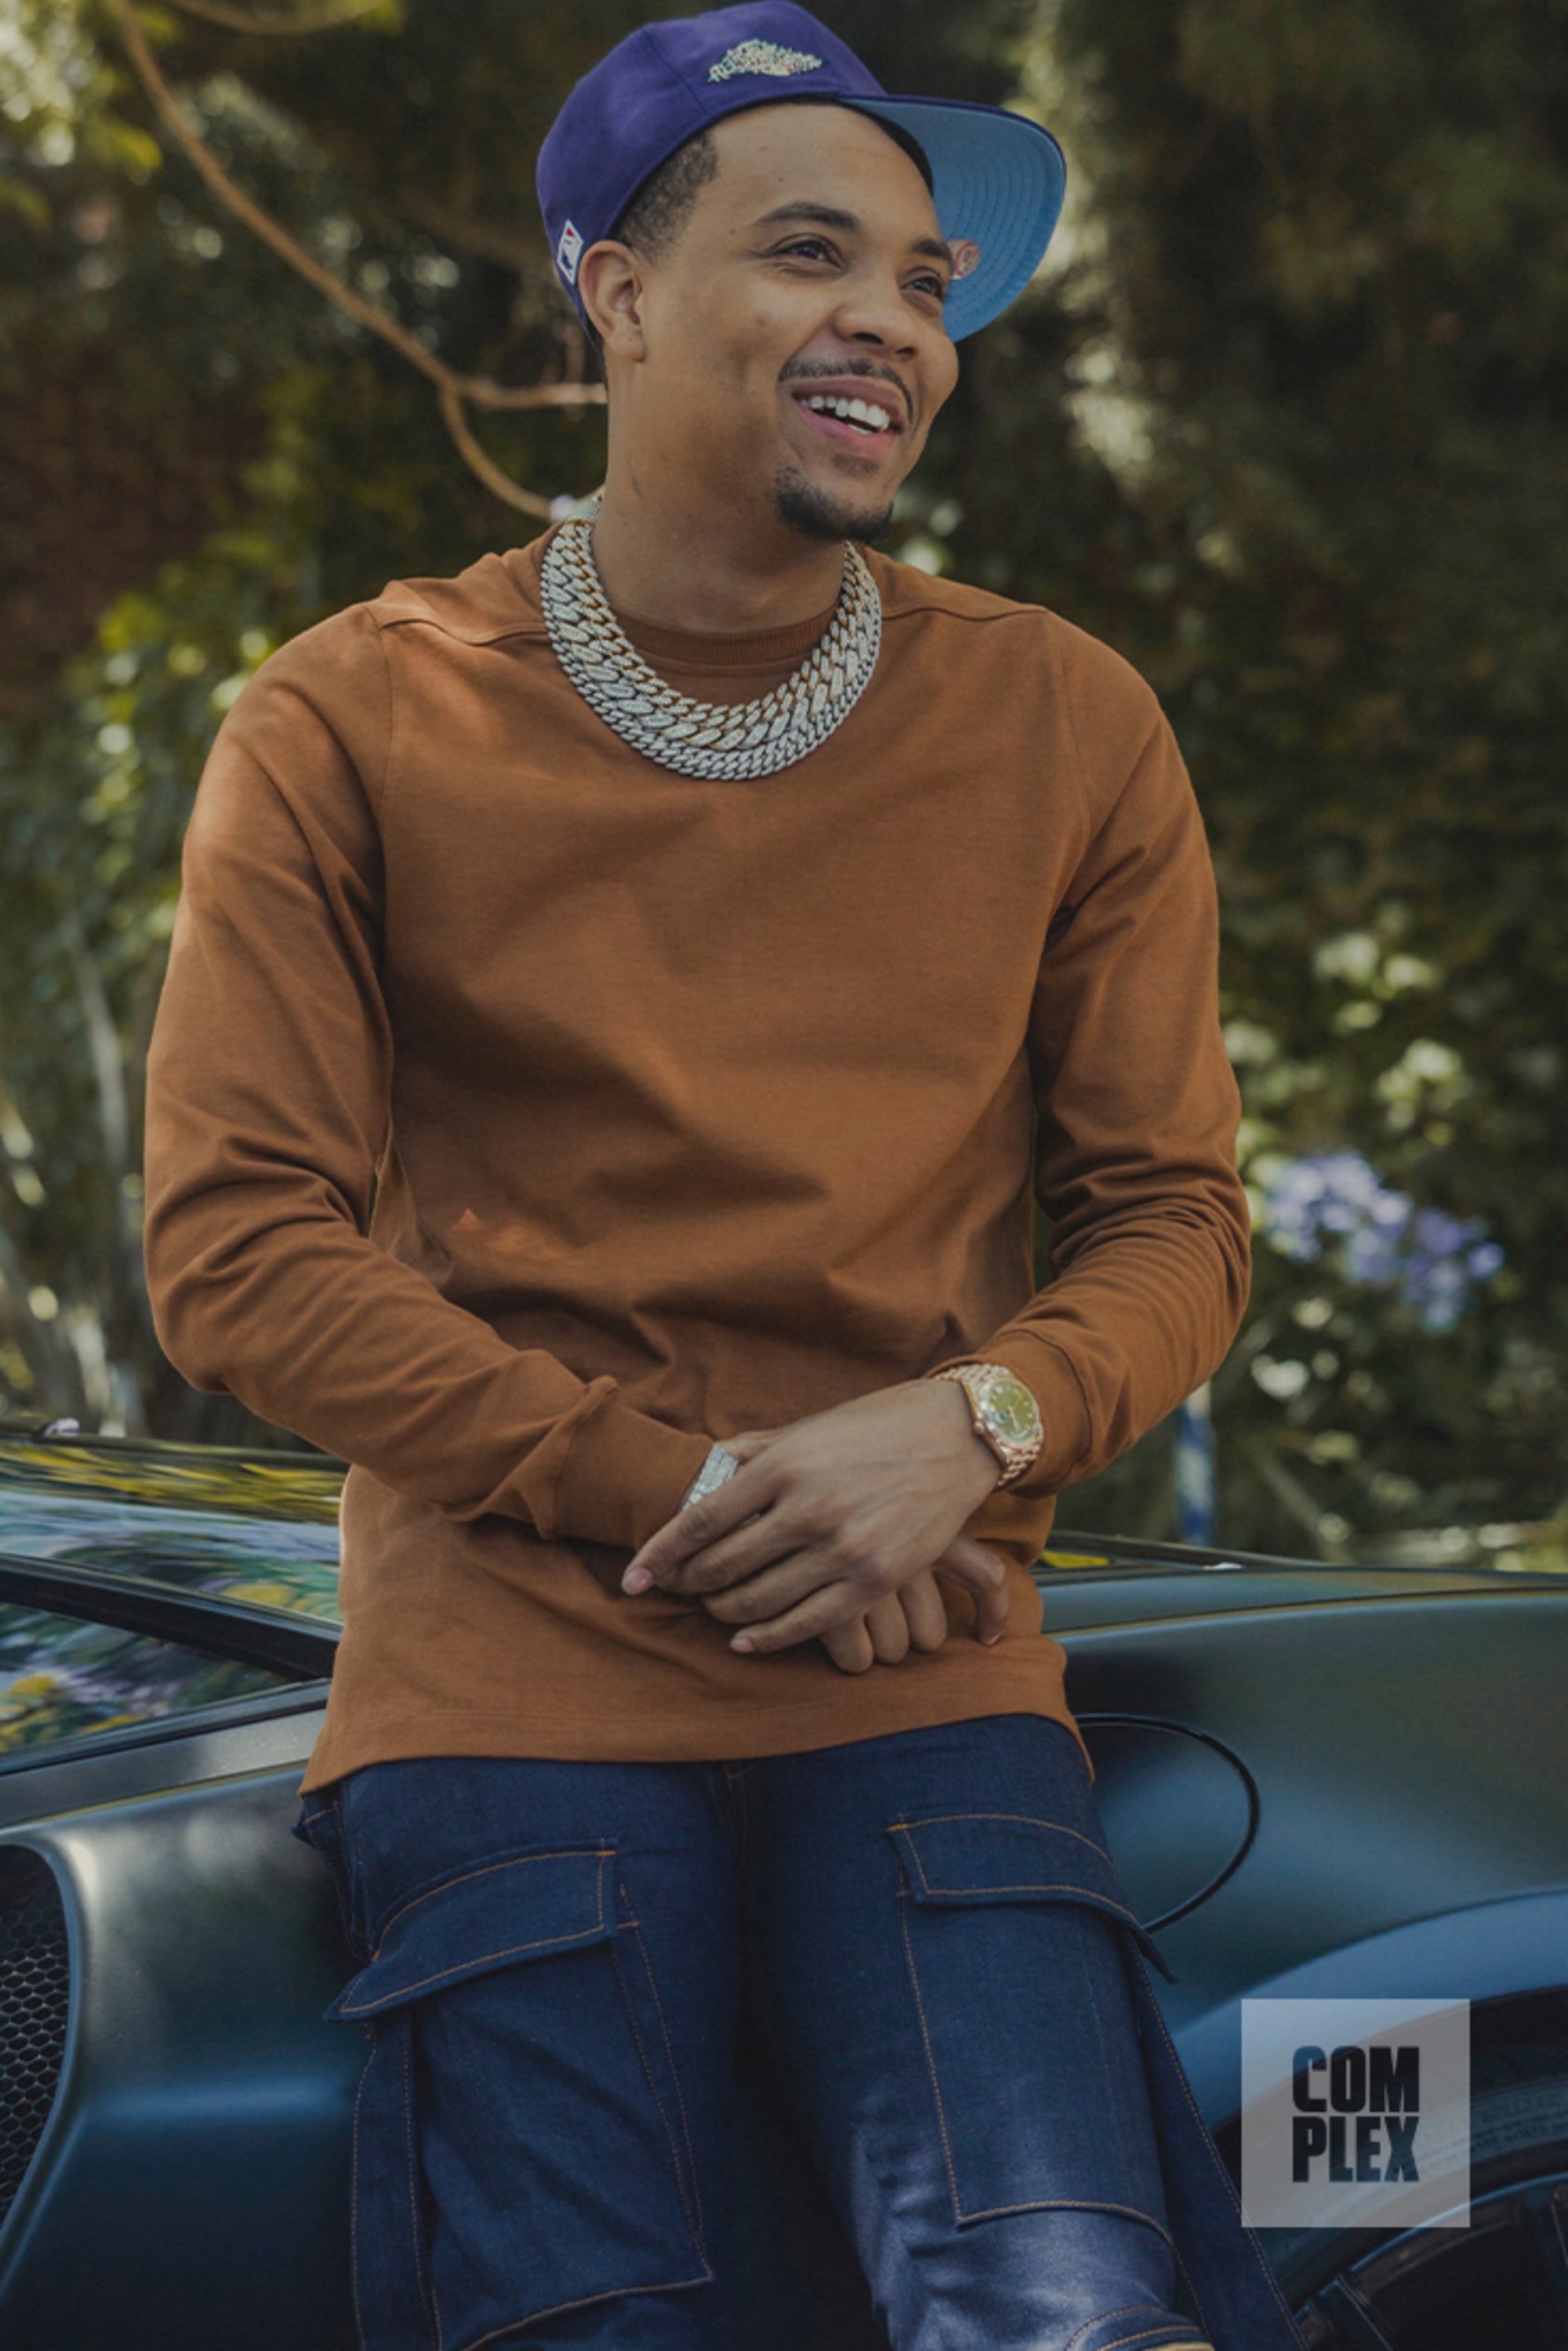 G Herbo's Opens Up and Talks About Life At 25